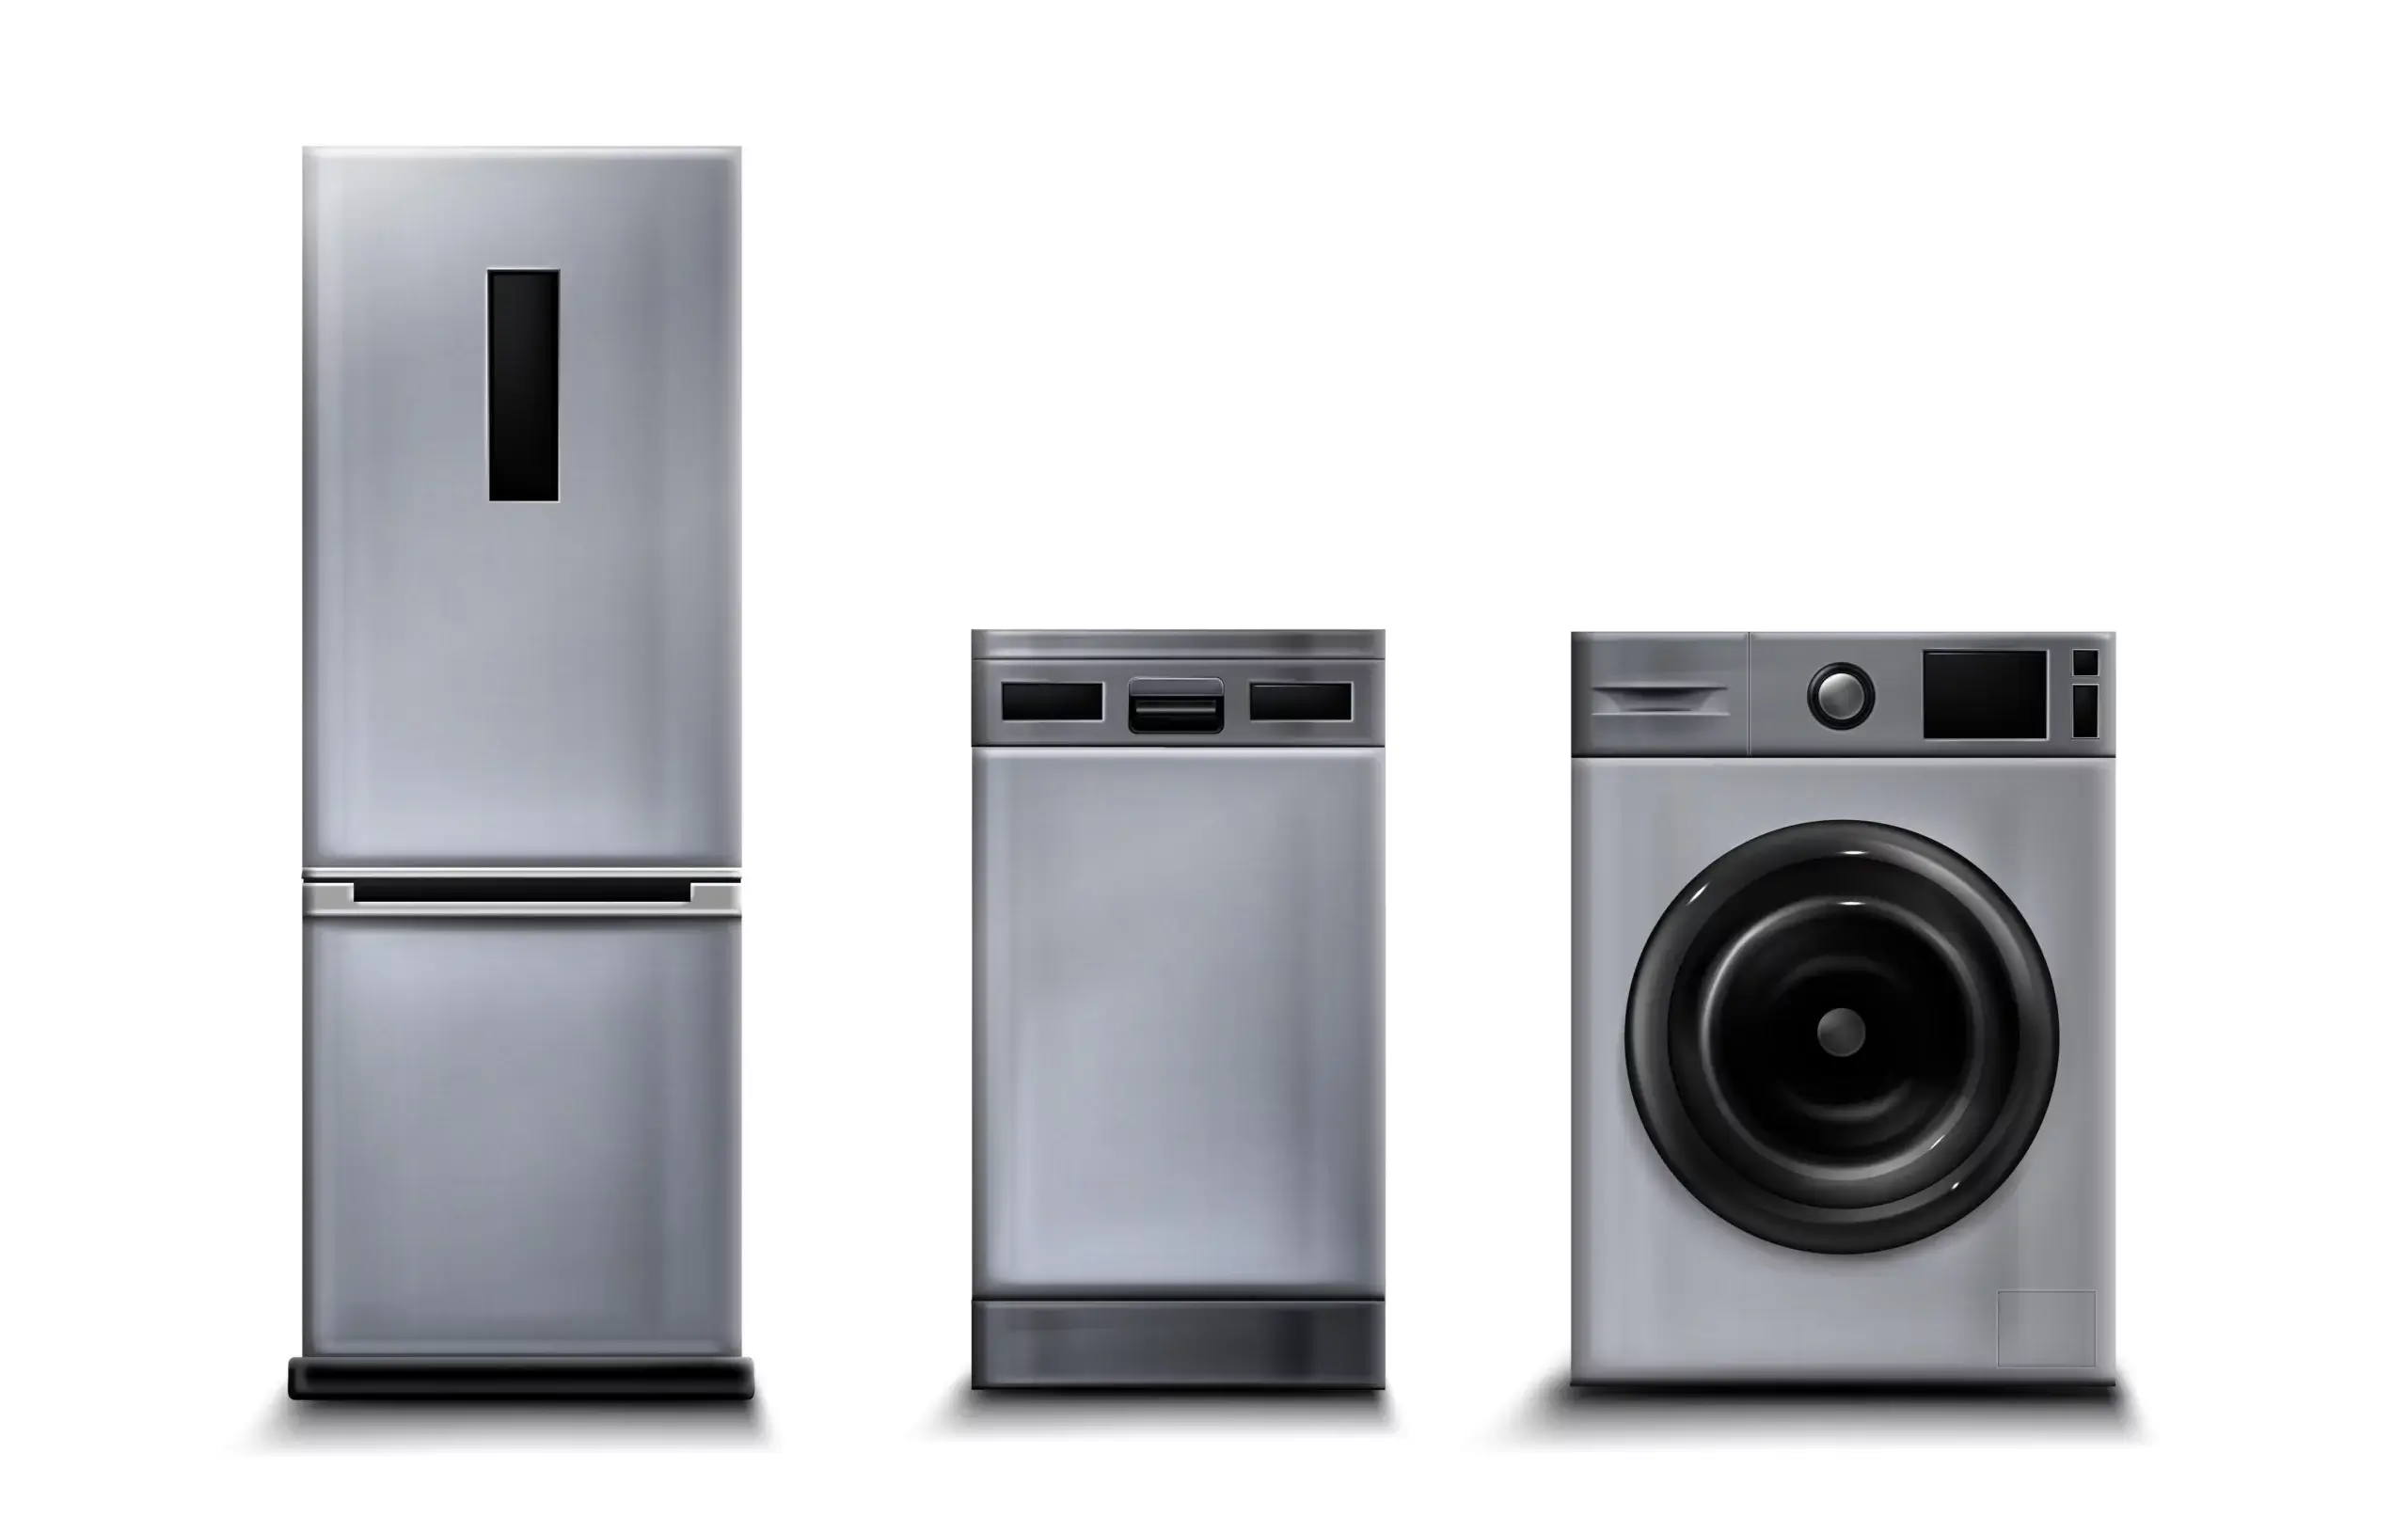 A DIY Guide: How to Repair Common Home Appliances